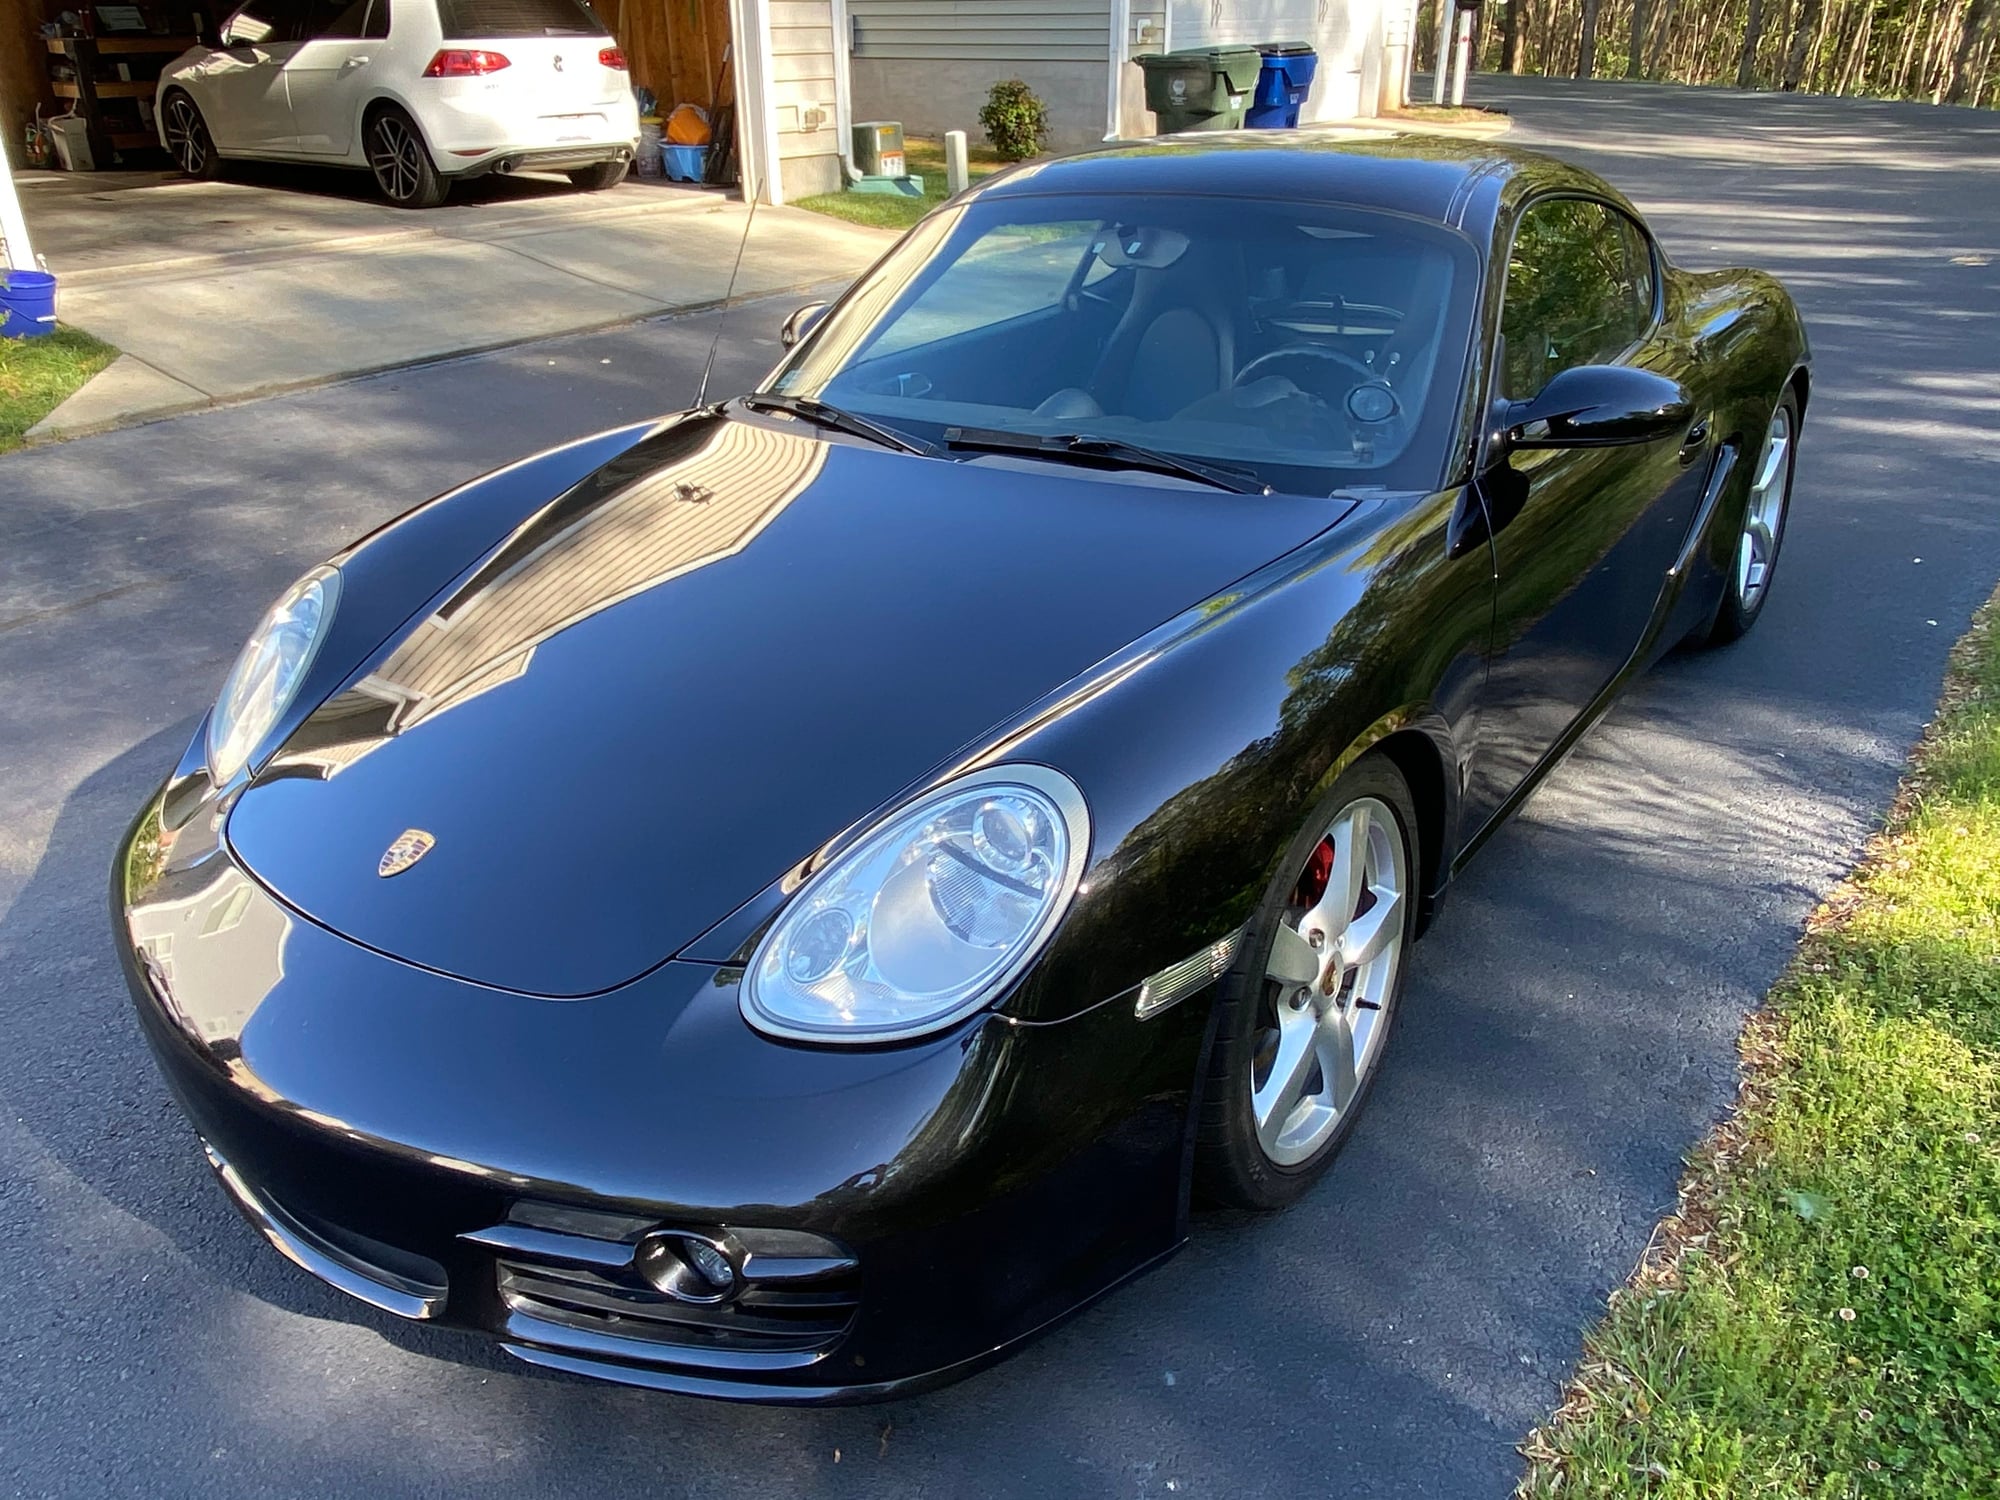 2006 Porsche Cayman - FS:  2006 Cayman S 6sp (non-running) - Used - VIN WP0AB29876U784777 - 117,052 Miles - 6 cyl - 2WD - Manual - Coupe - Black - Raleigh, NC 27603, United States